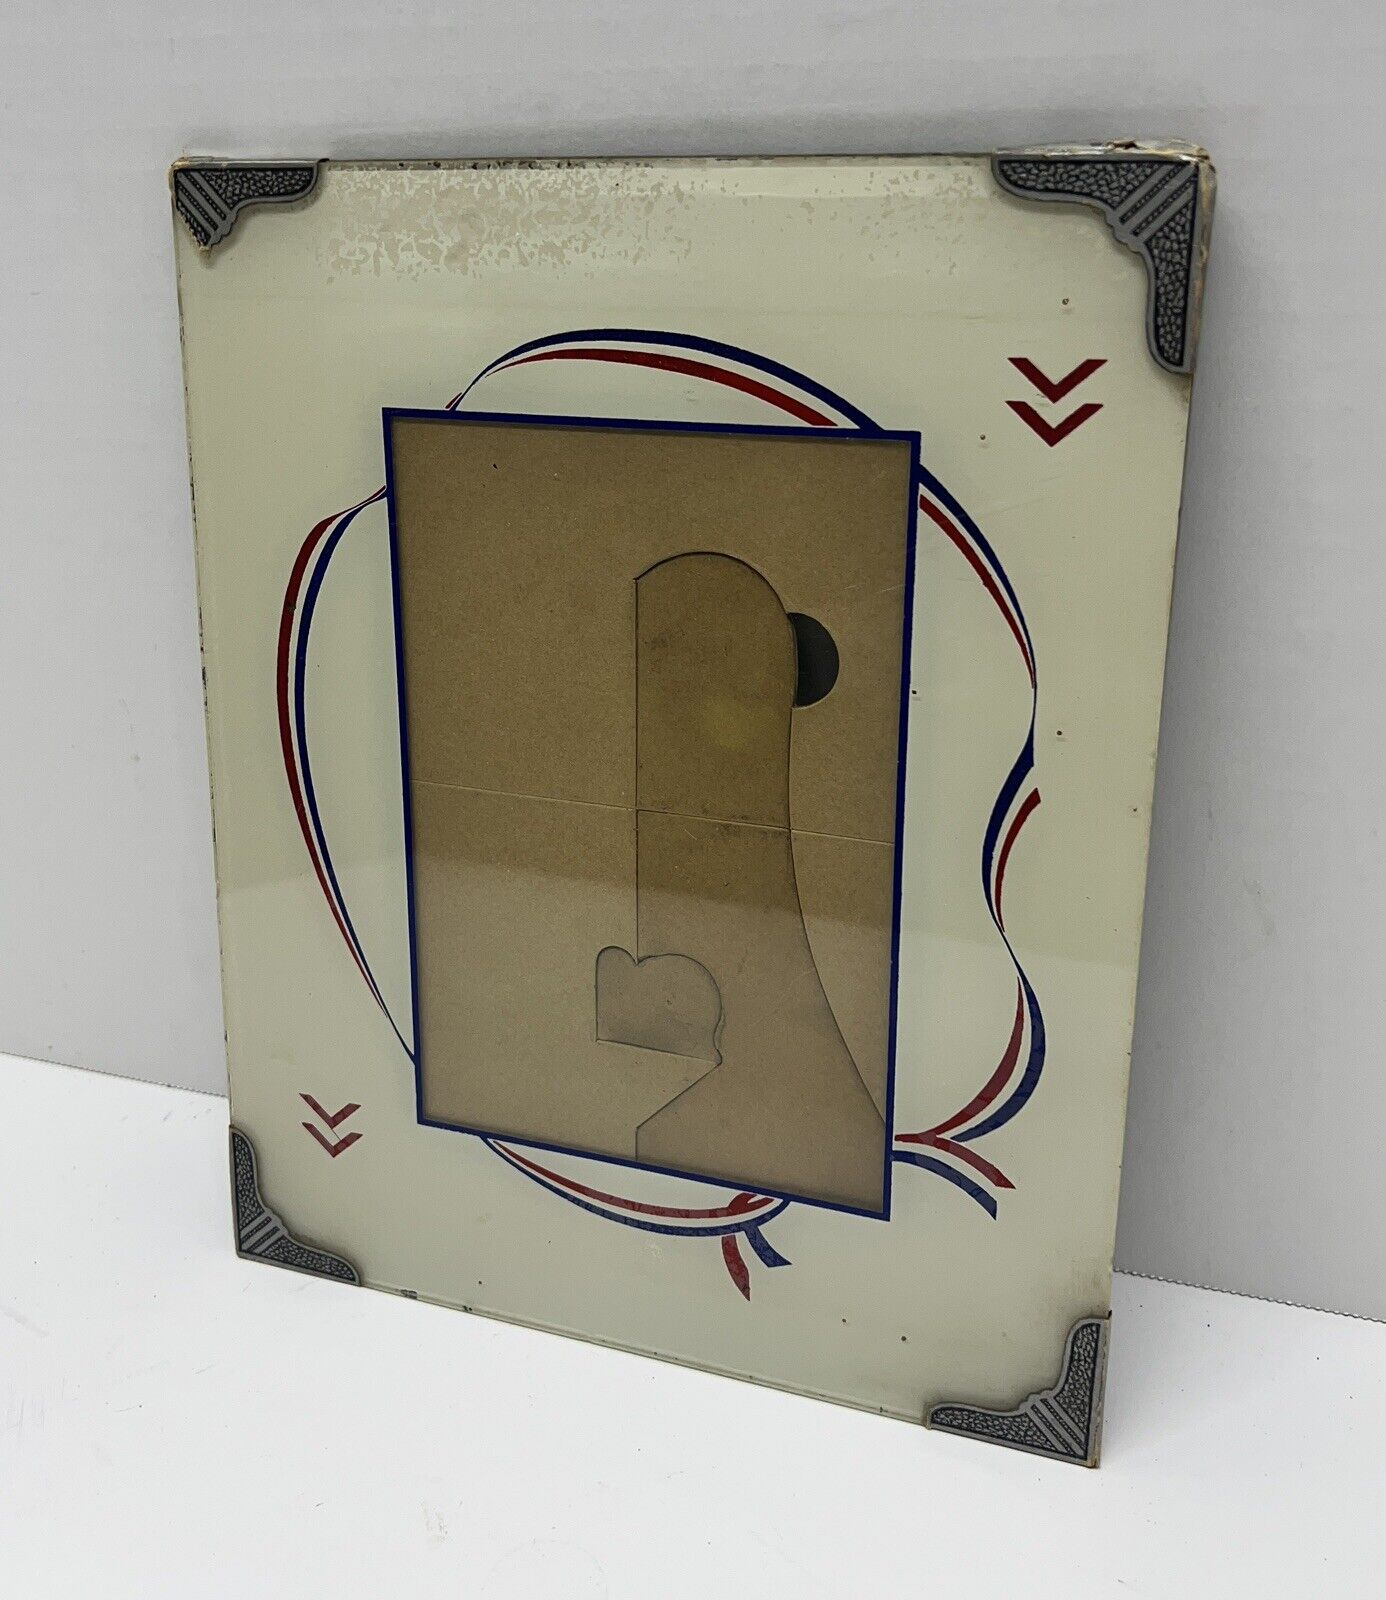 Antique 1930s ART DECO Cream W/ Red & Blue Easel Back PHOTOGRAPH FRAME 8”x10”